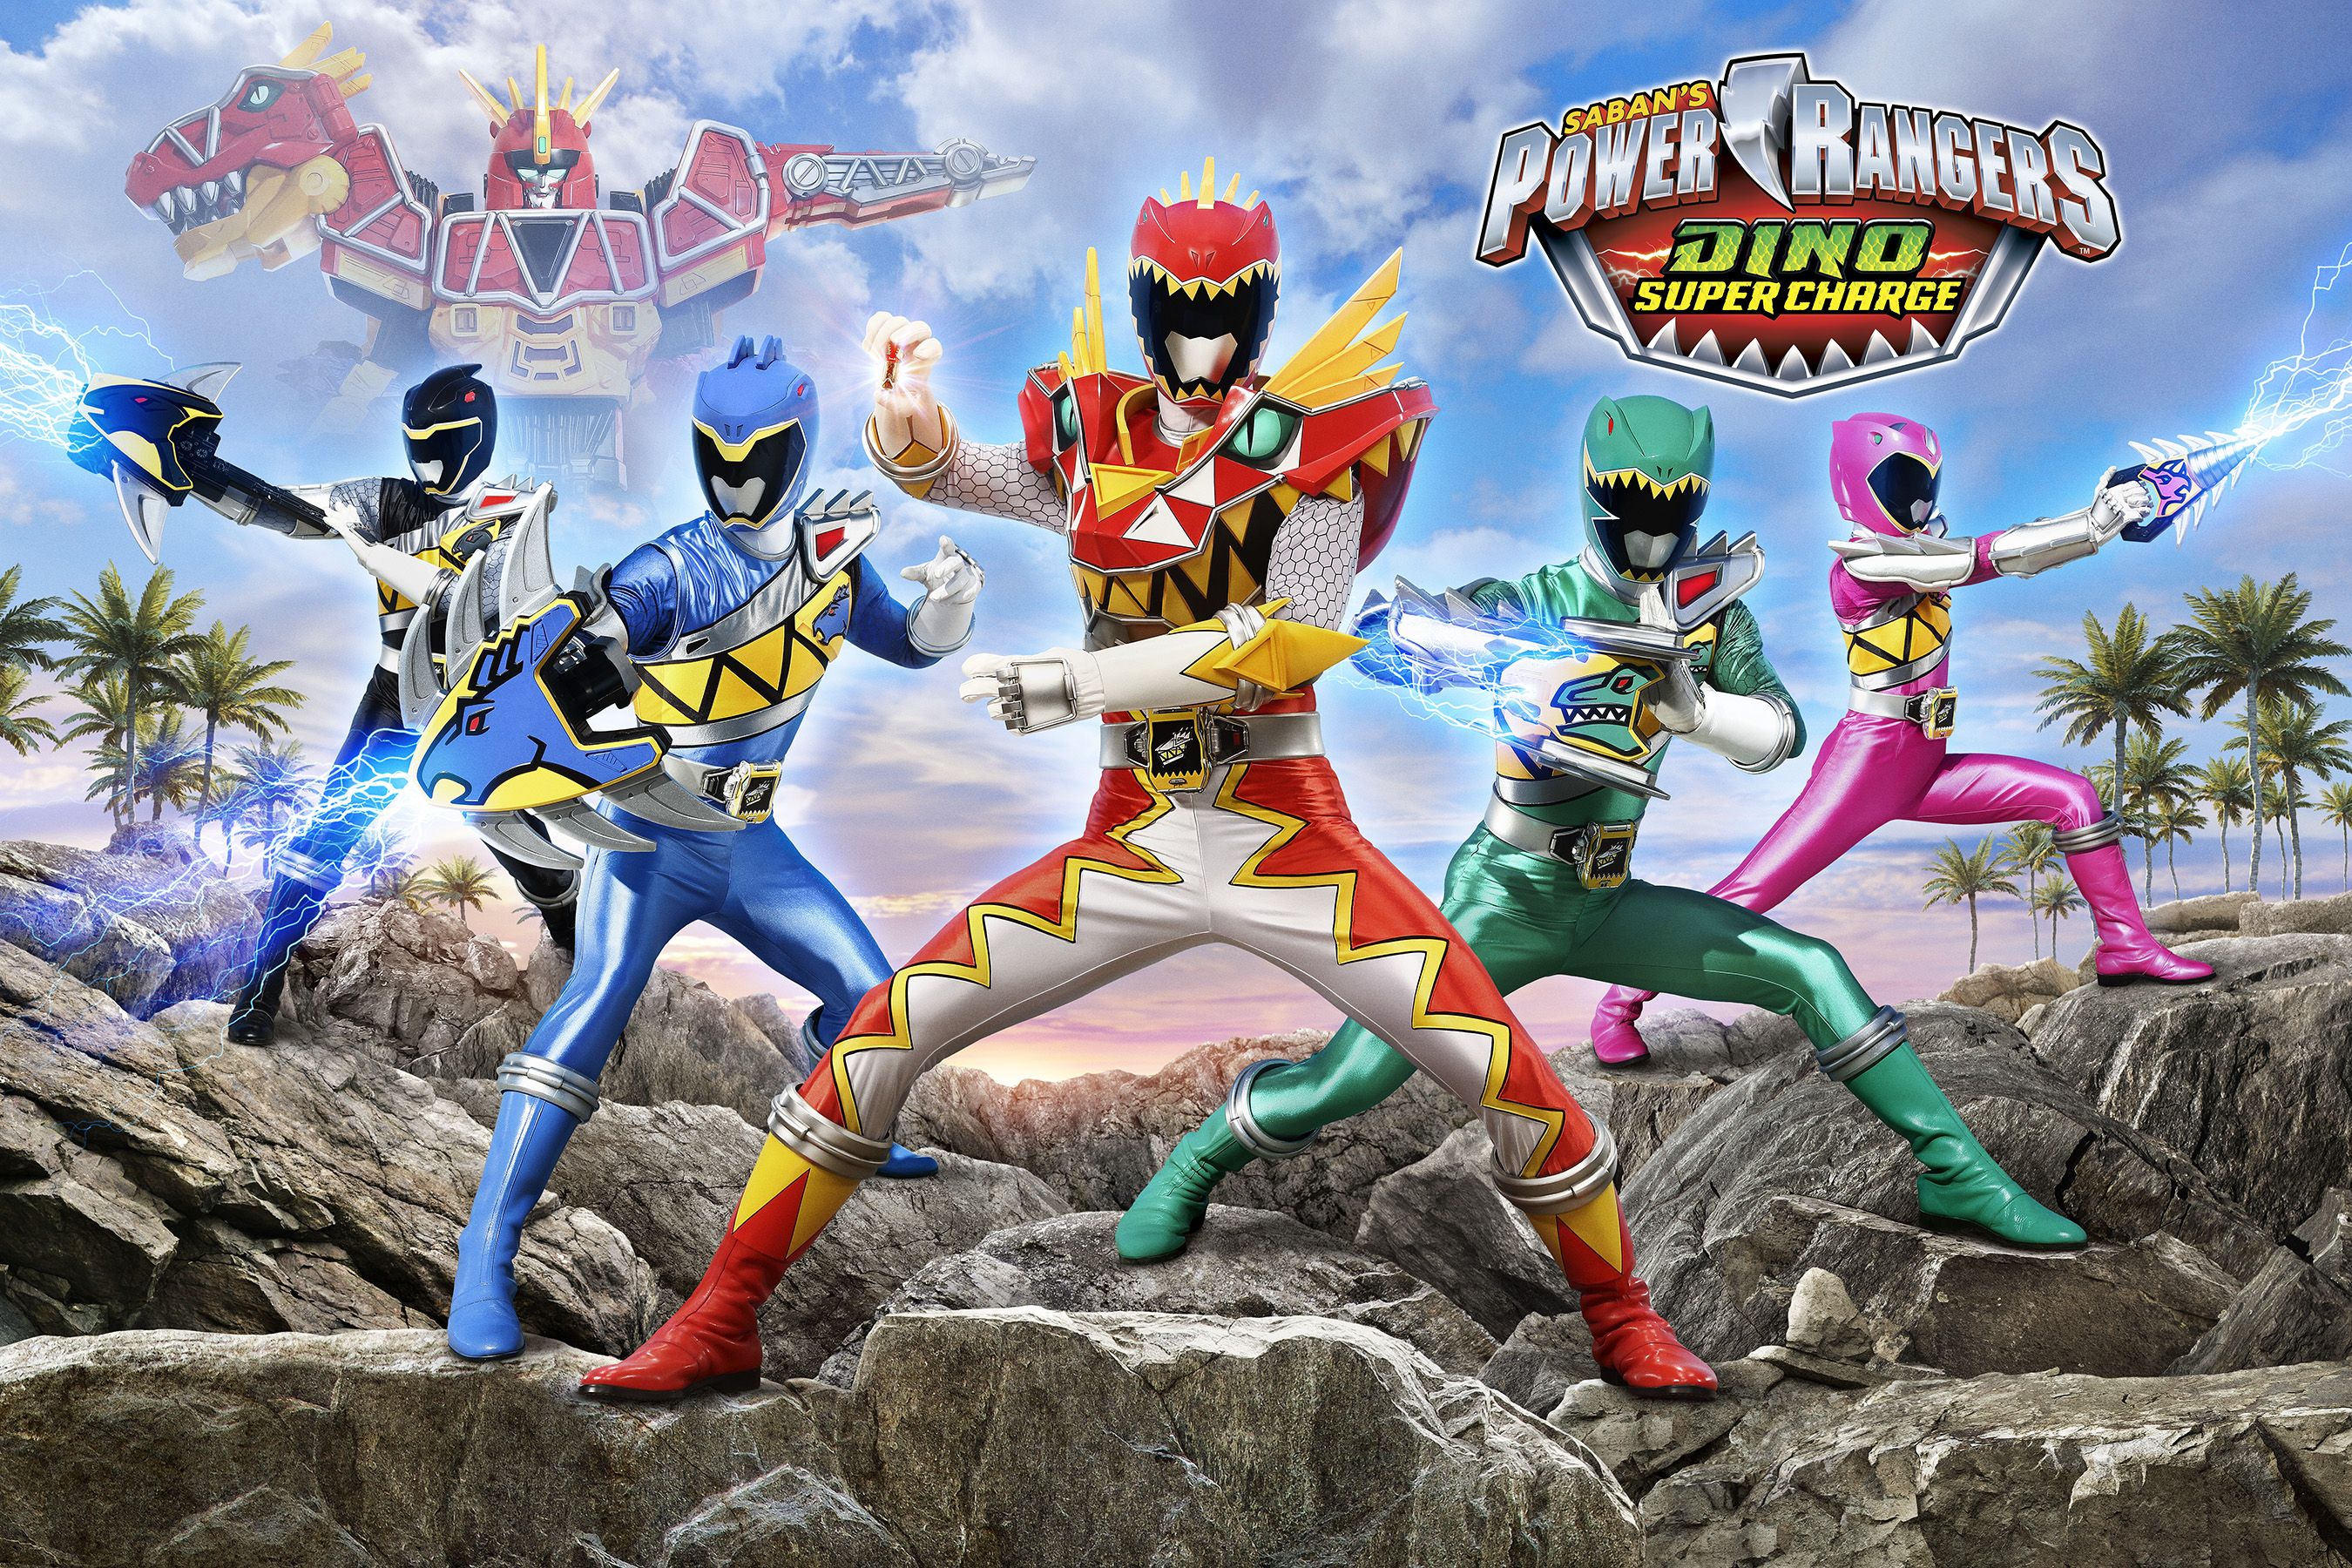 Power Rangers Dino Super Charge Announced! 